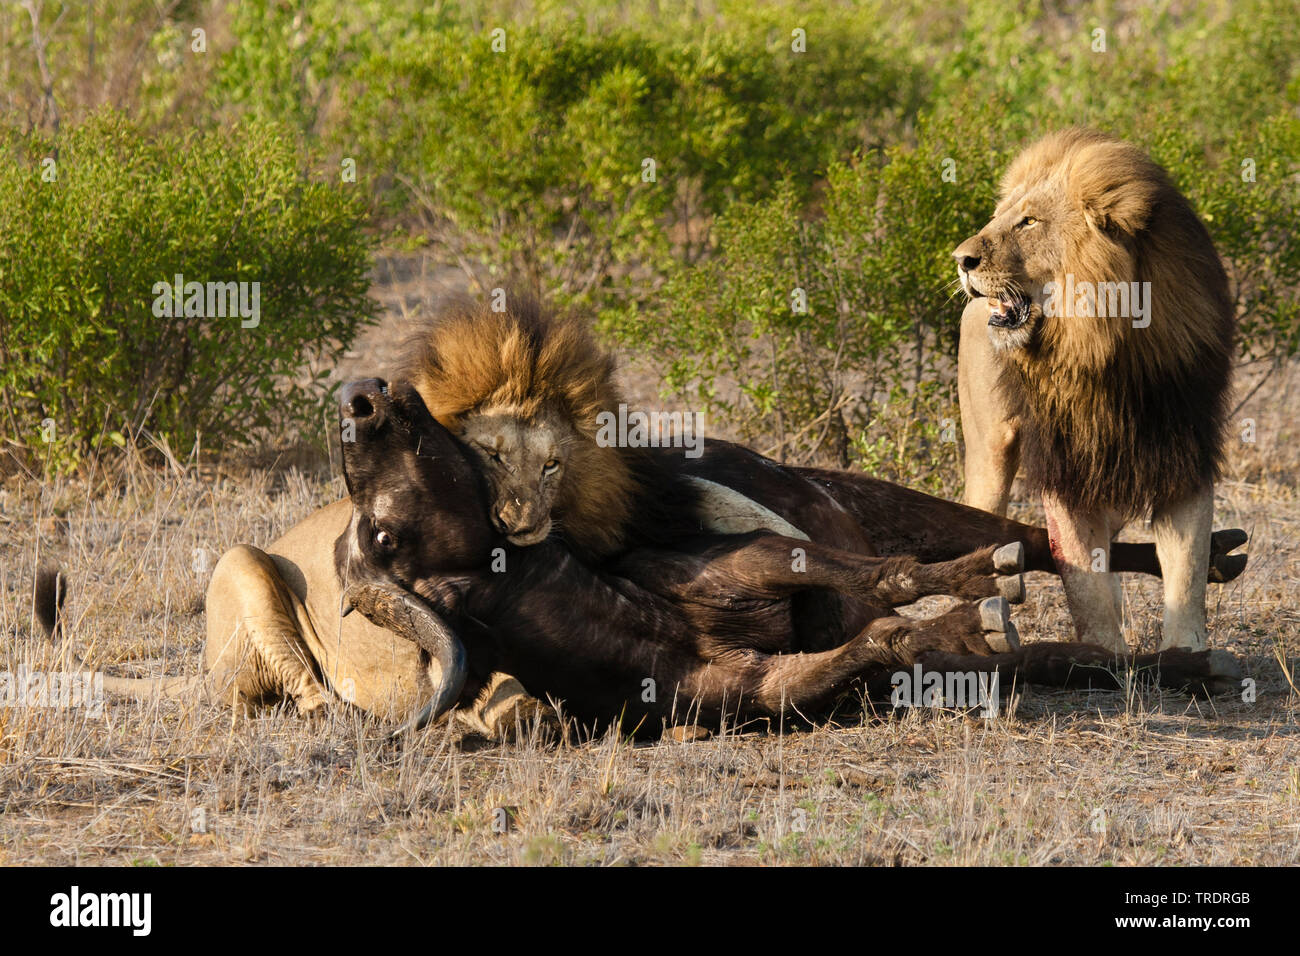 Lion Killing High Resolution Stock Photography and Images - Alamy